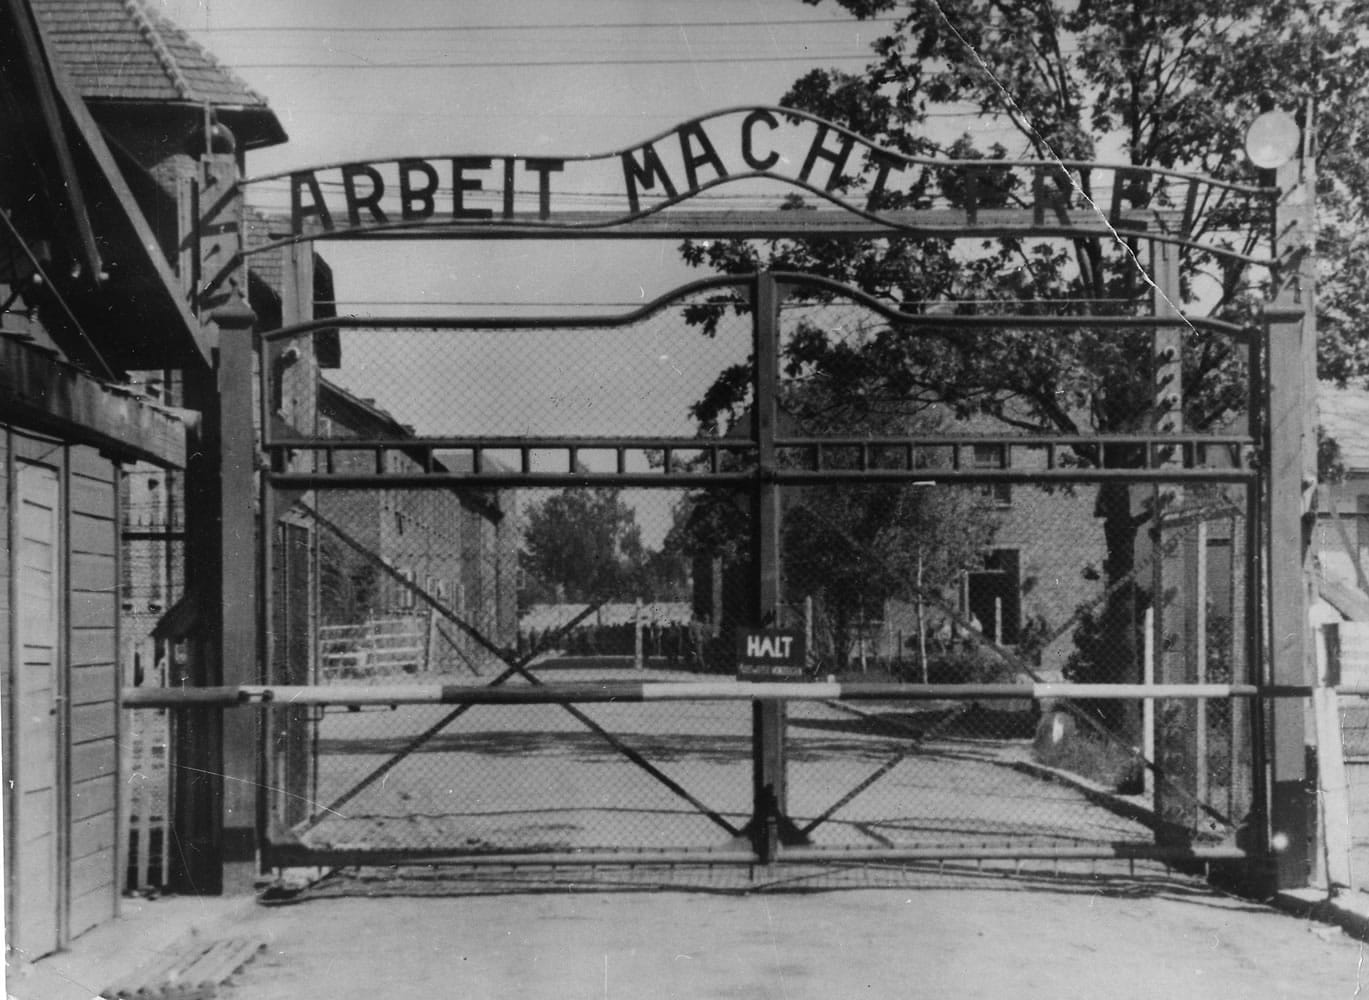 The main gate of the Nazi concentration camp Auschwitz I, Poland, which was liberated by the Russians in January 1945. Writing over the gate reads: u201cArbeit macht freiu201d (Work makes free u2014 or work liberates).